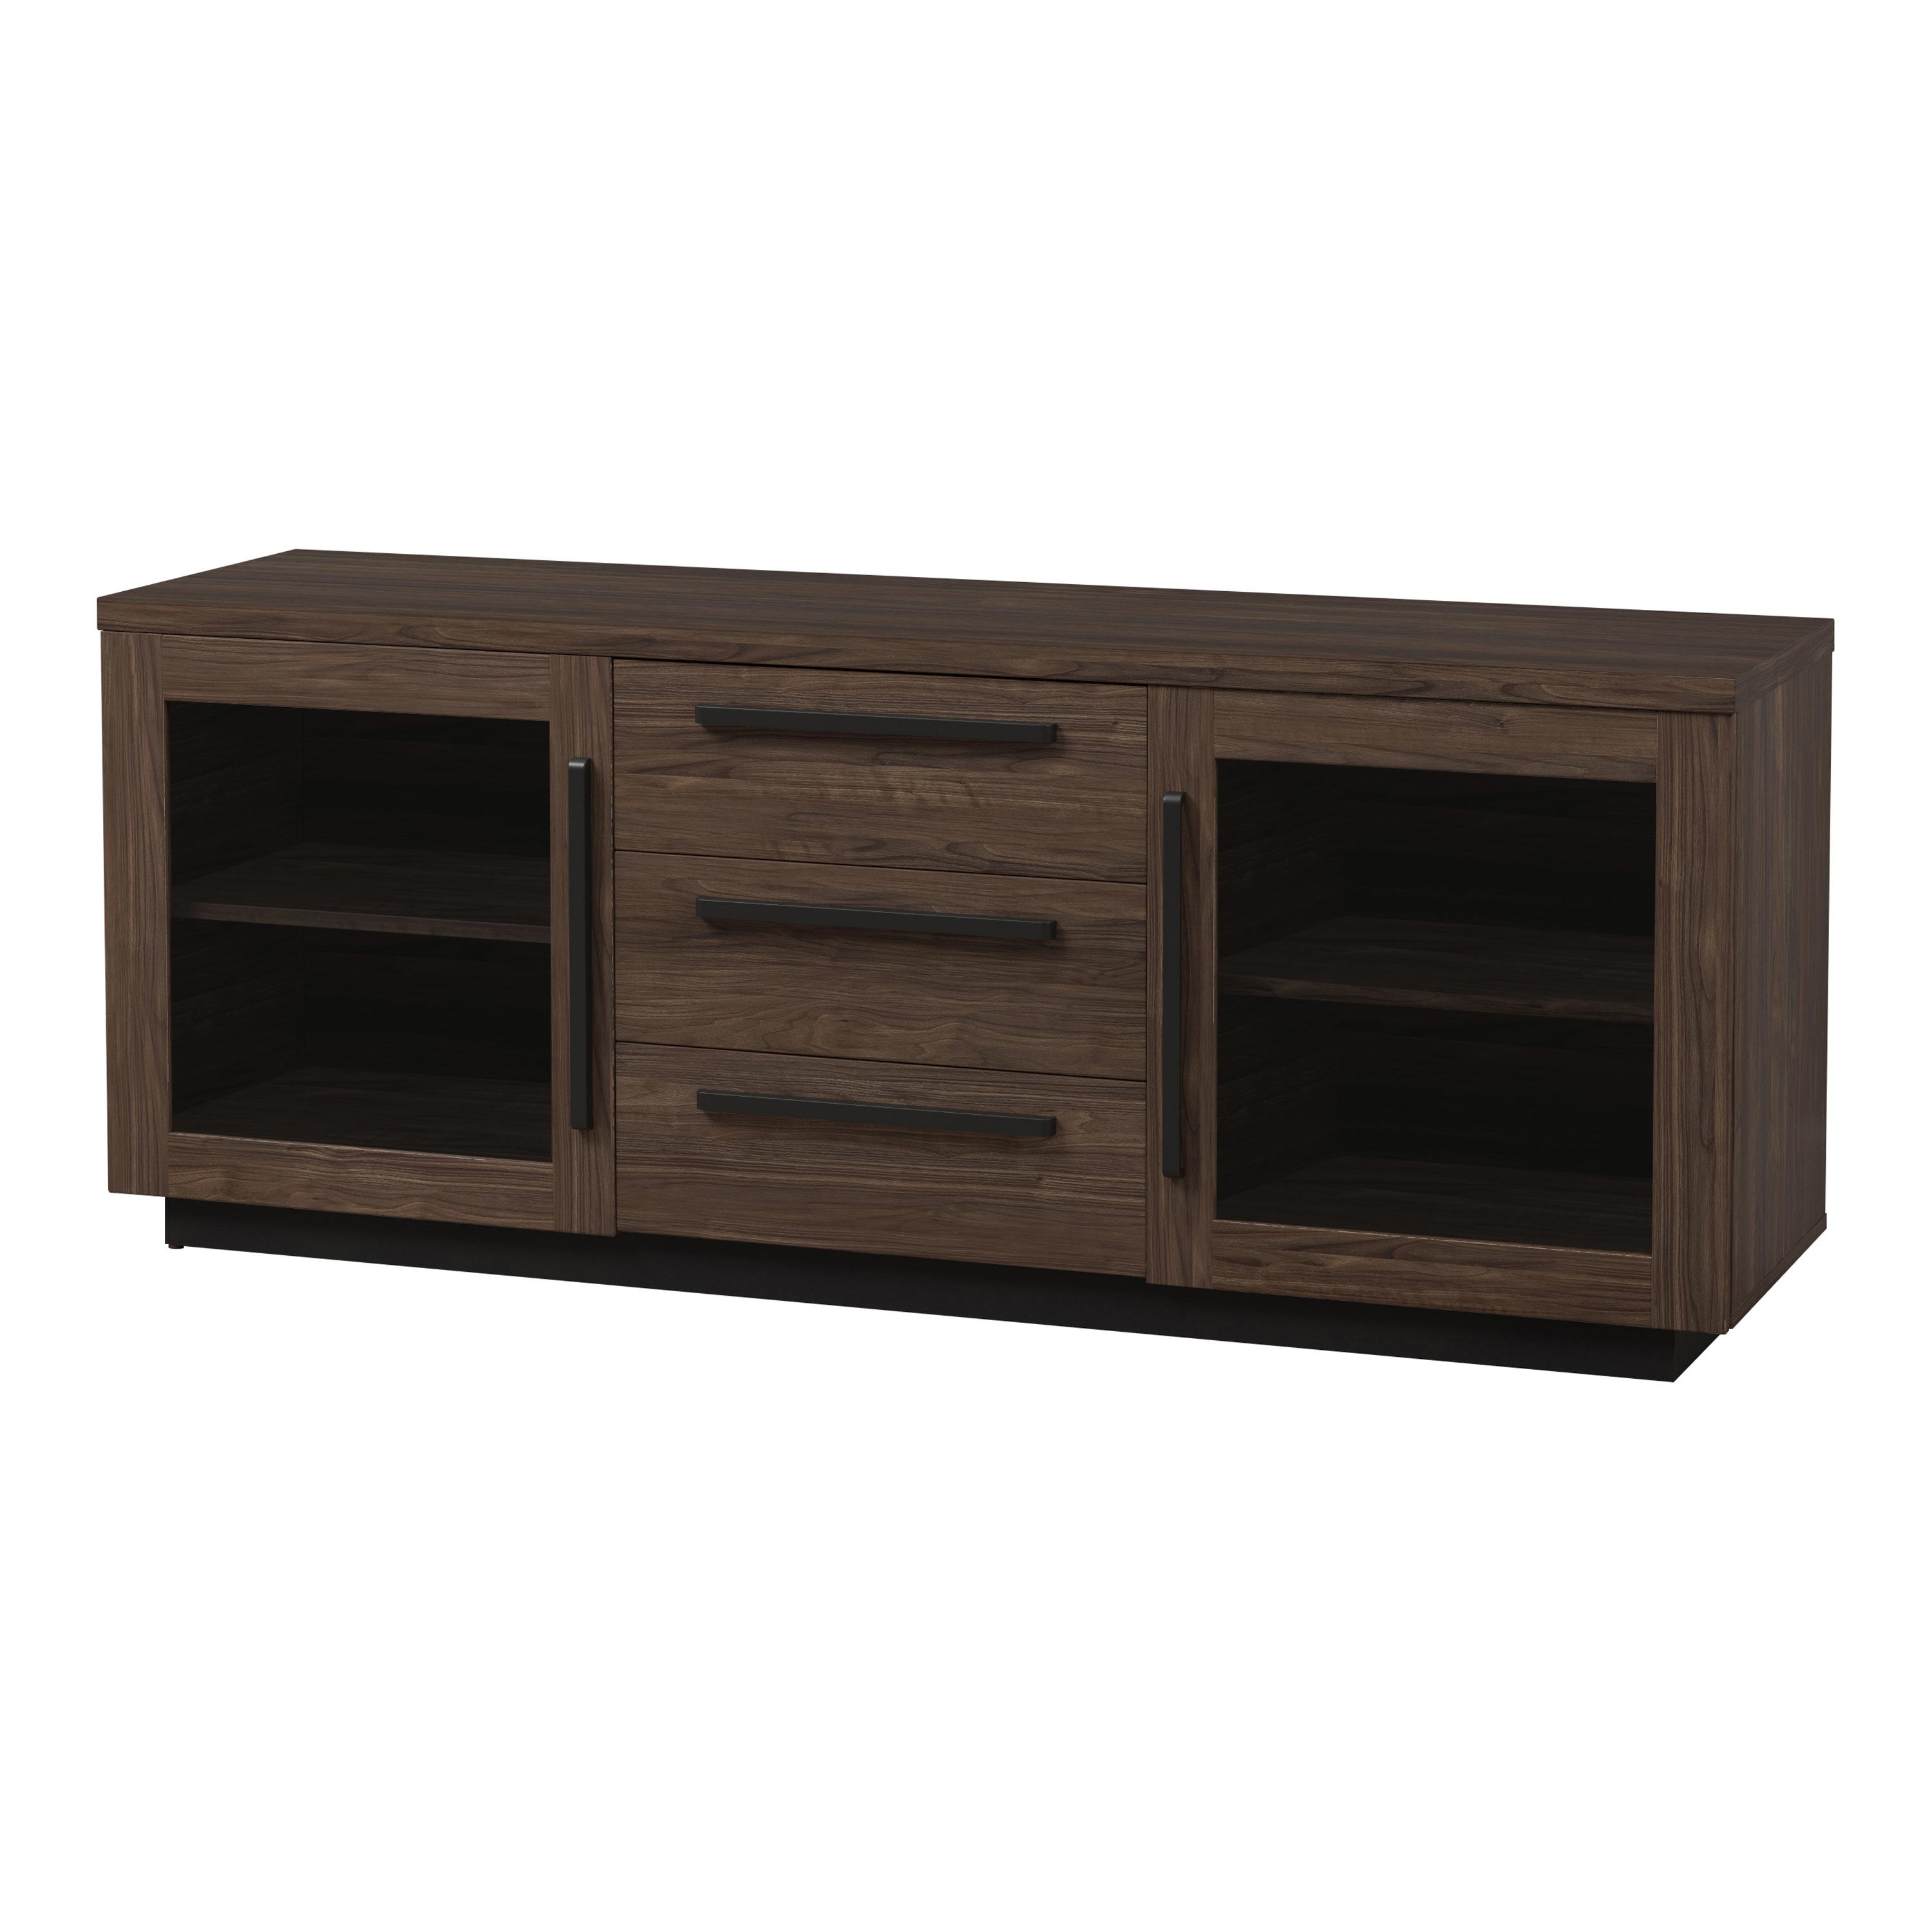 Transitional Tv Console 709672 709672 in Walnut 